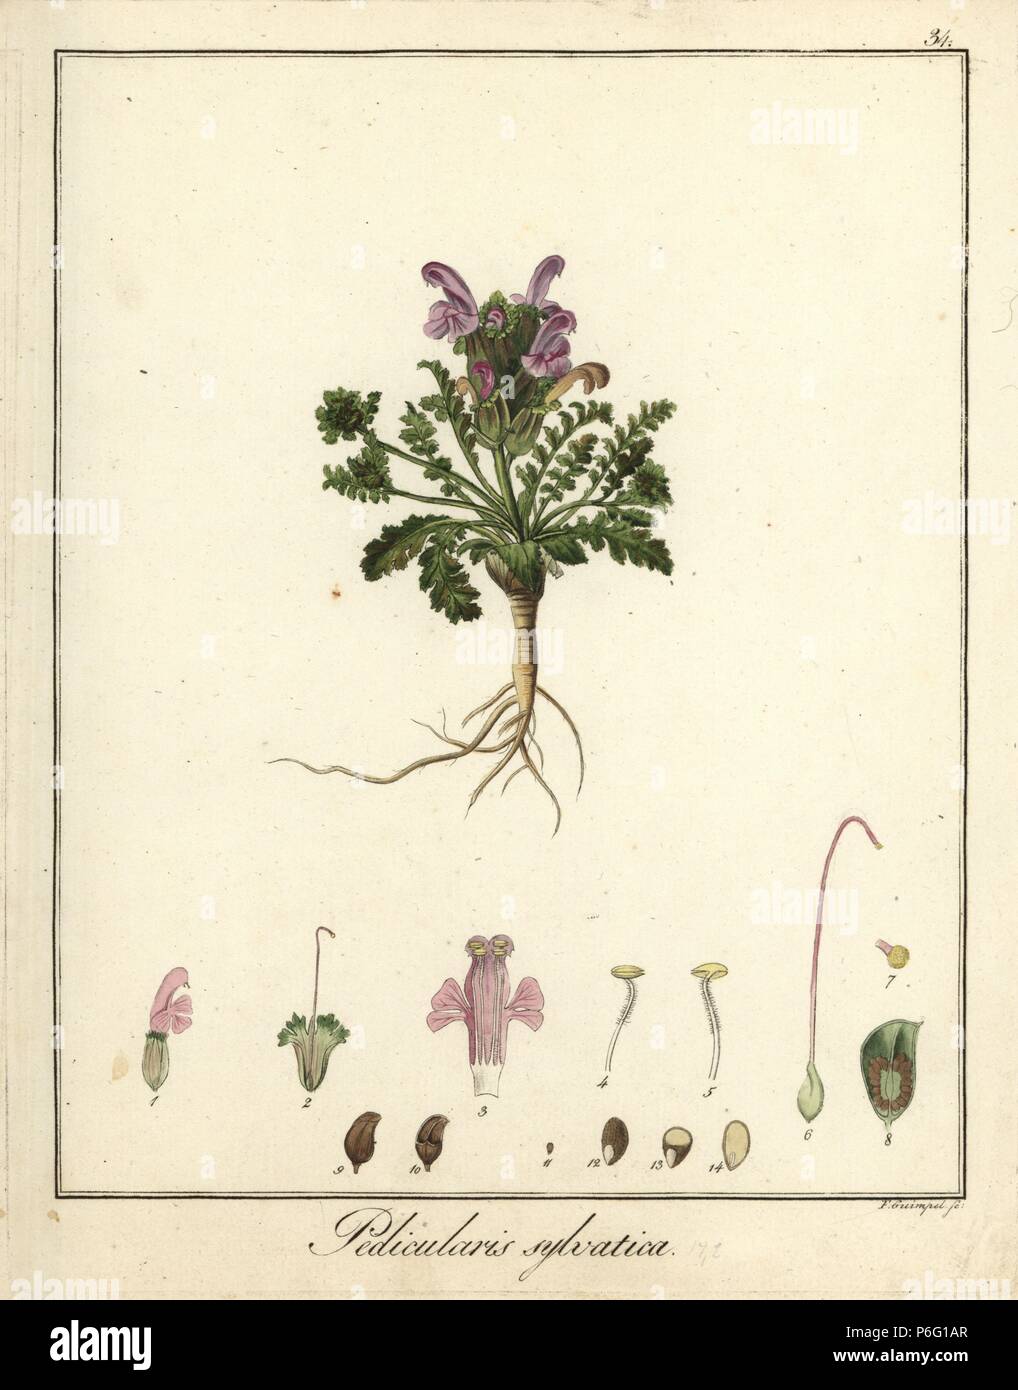 Common lousewort, Pedicularis sylvatica. Handcoloured copperplate engraving by F. Guimpel from Dr. Friedrich Gottlob Hayne's Medical Botany, Berlin, 1822. Hayne (1763-1832) was a German botanist, apothecary and professor of pharmaceutical botany at Berlin University. Stock Photo